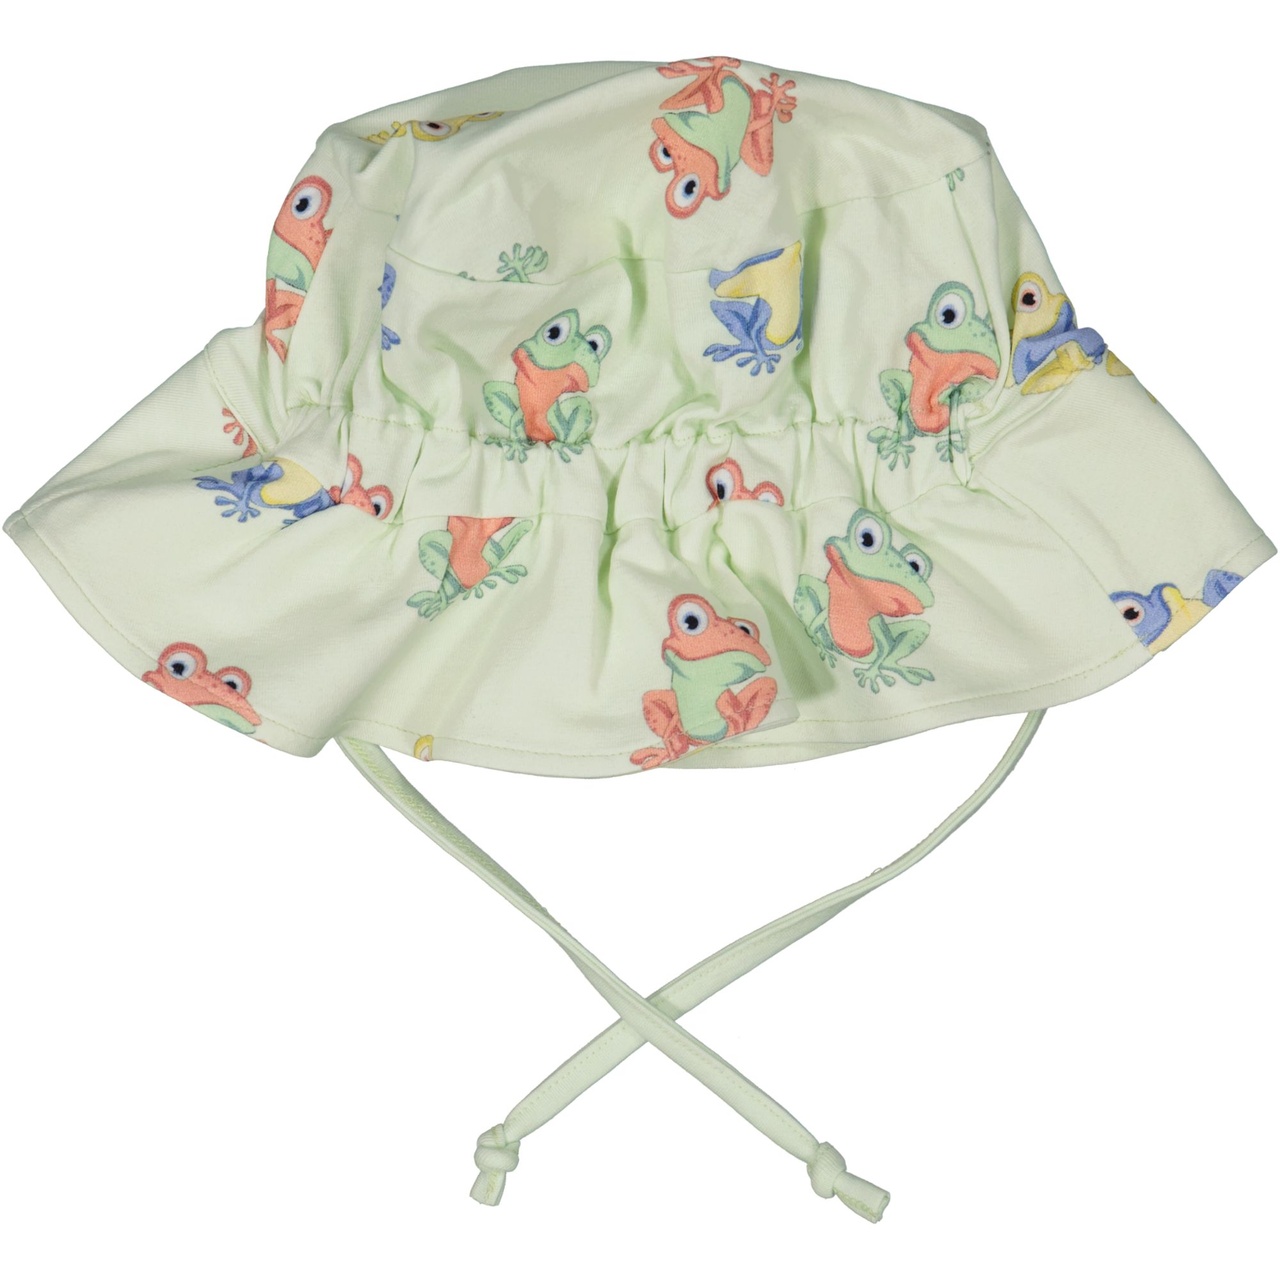 Bamboo Sunny hat Green Frog 2-6Y